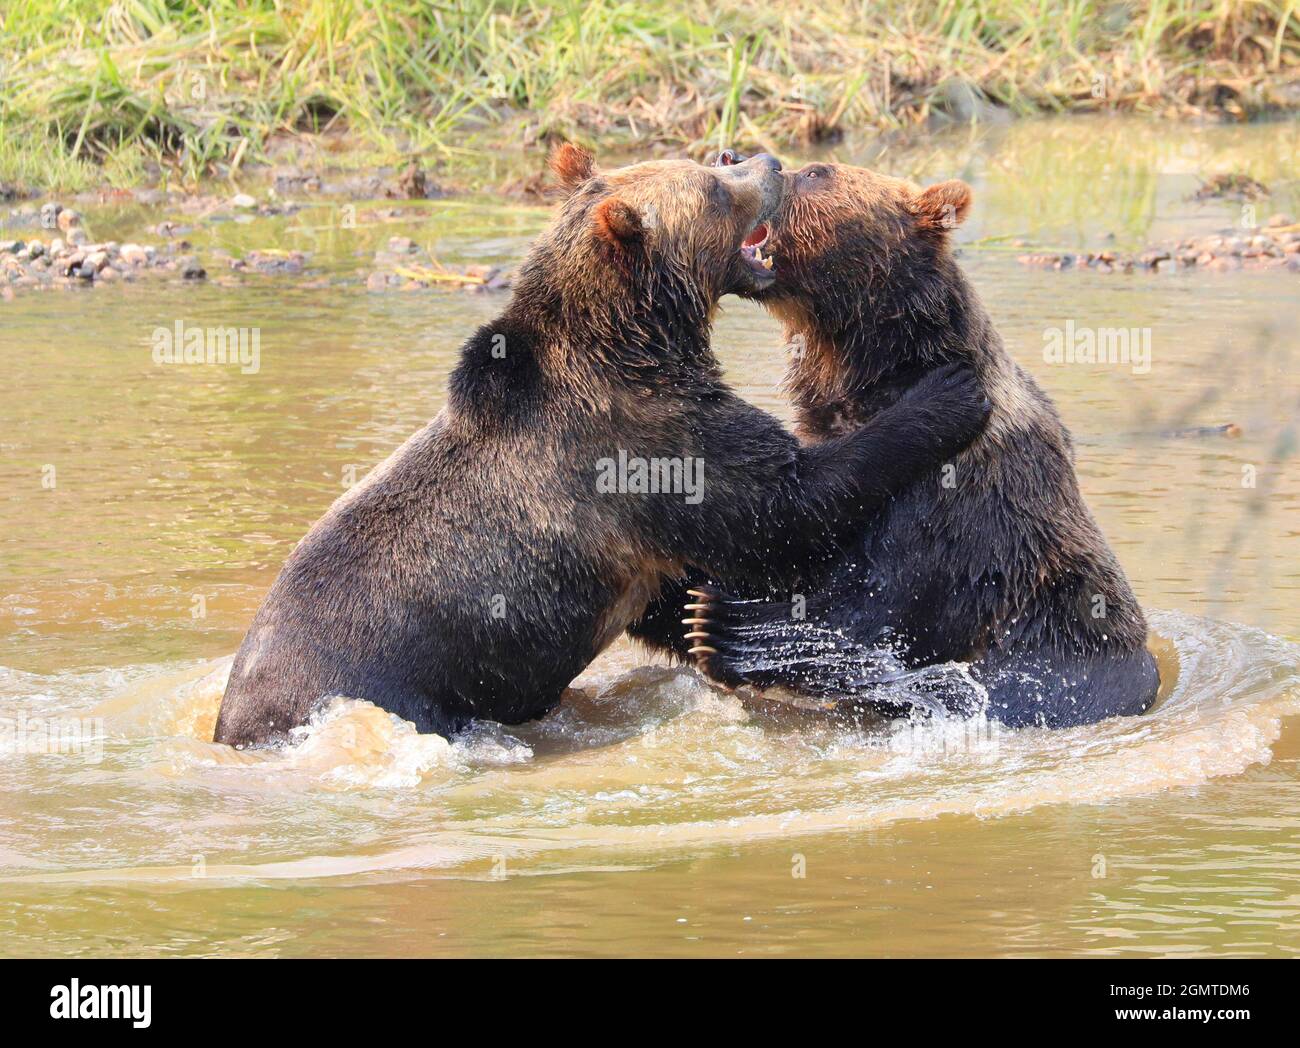 A closeup of Grizzly bears playing together in water, Quebec, Canada Stock Photo